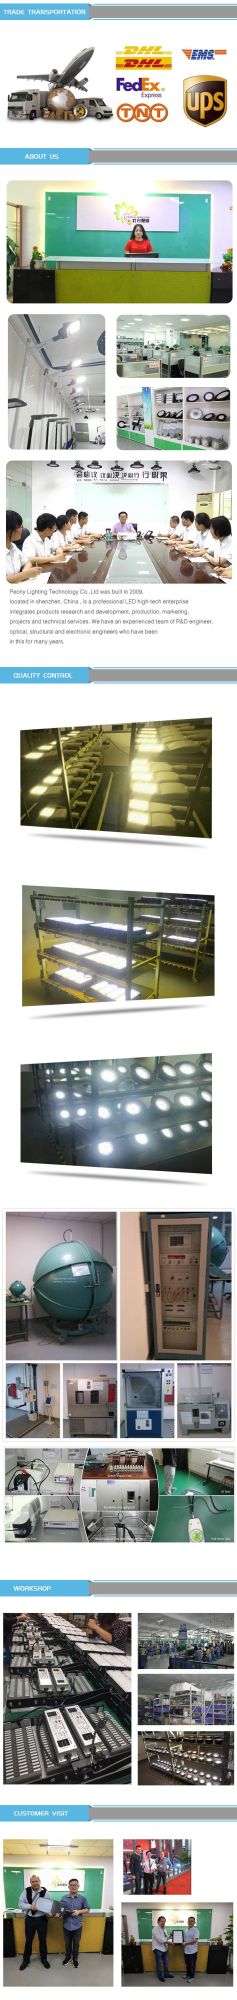 Newest Design 120-150W LED Street Lamp with 8 Years Warranty LED Road Light